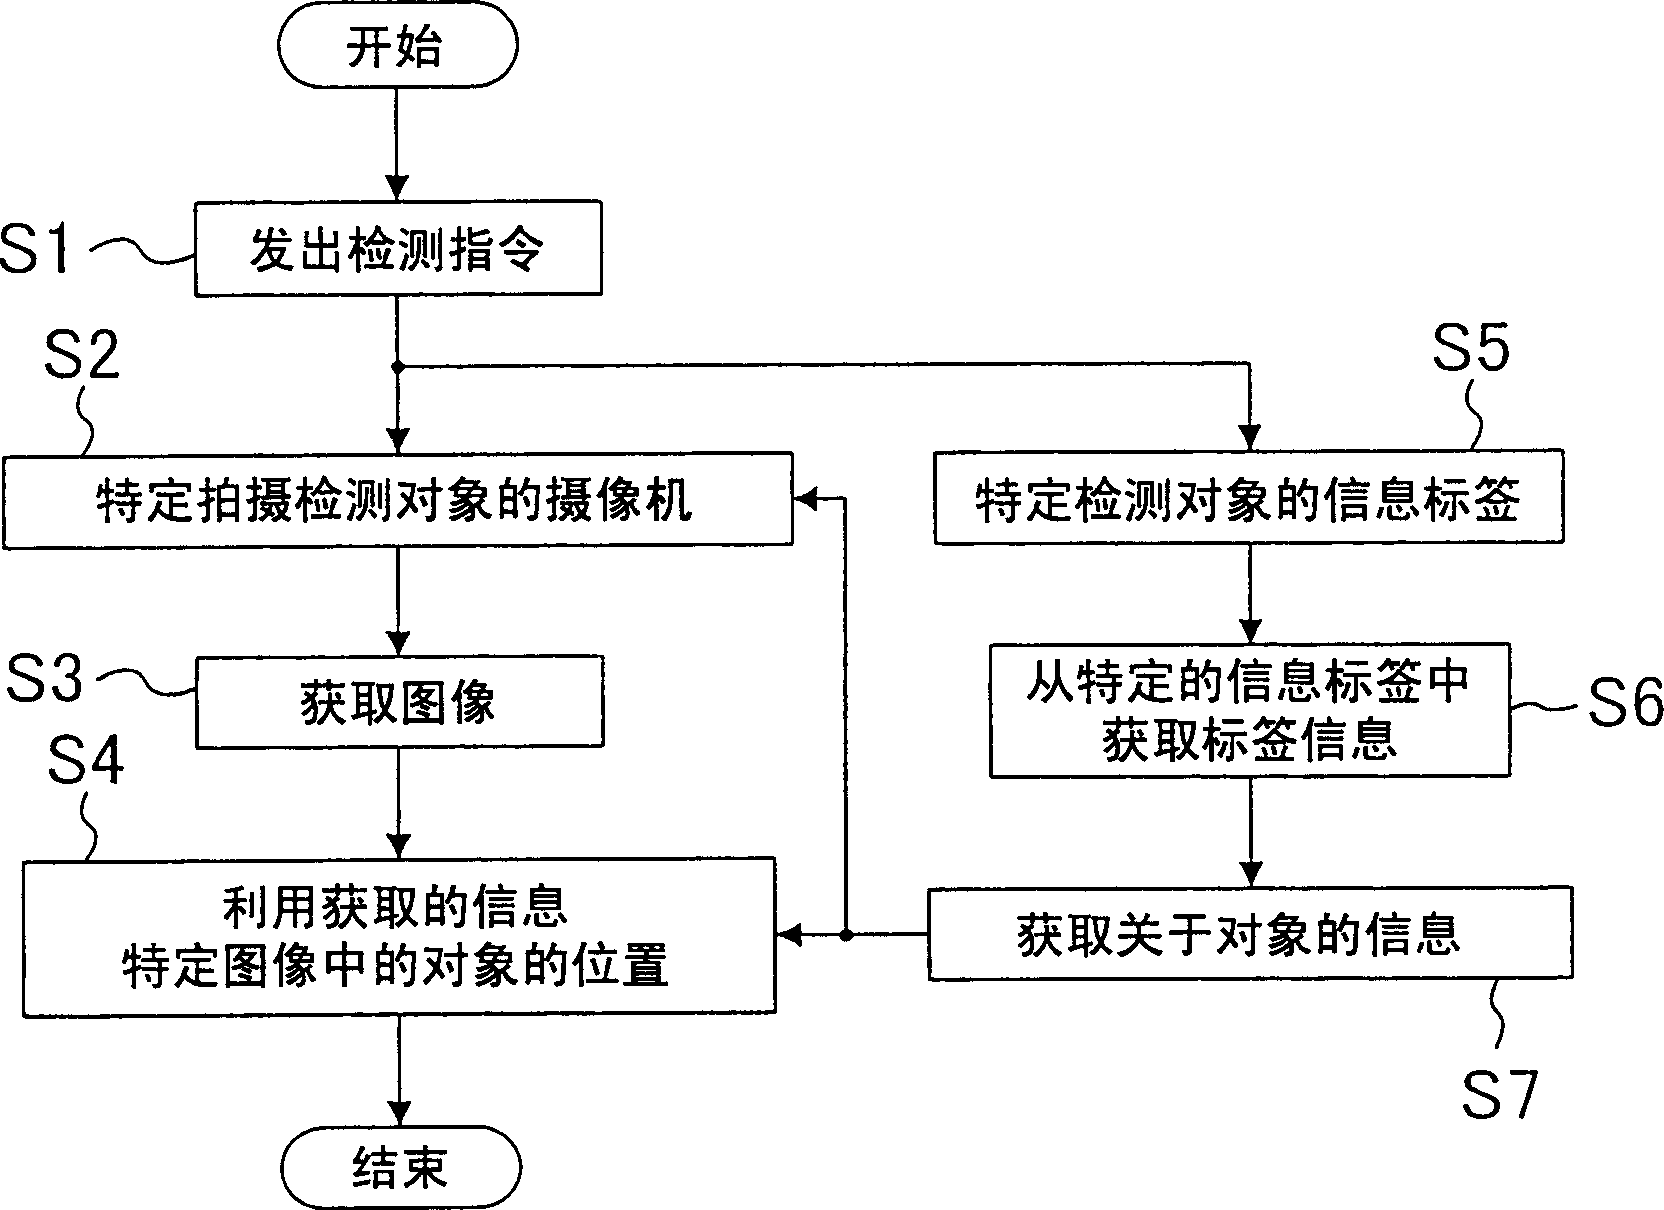 Object detection device, object detection server, and object detection method